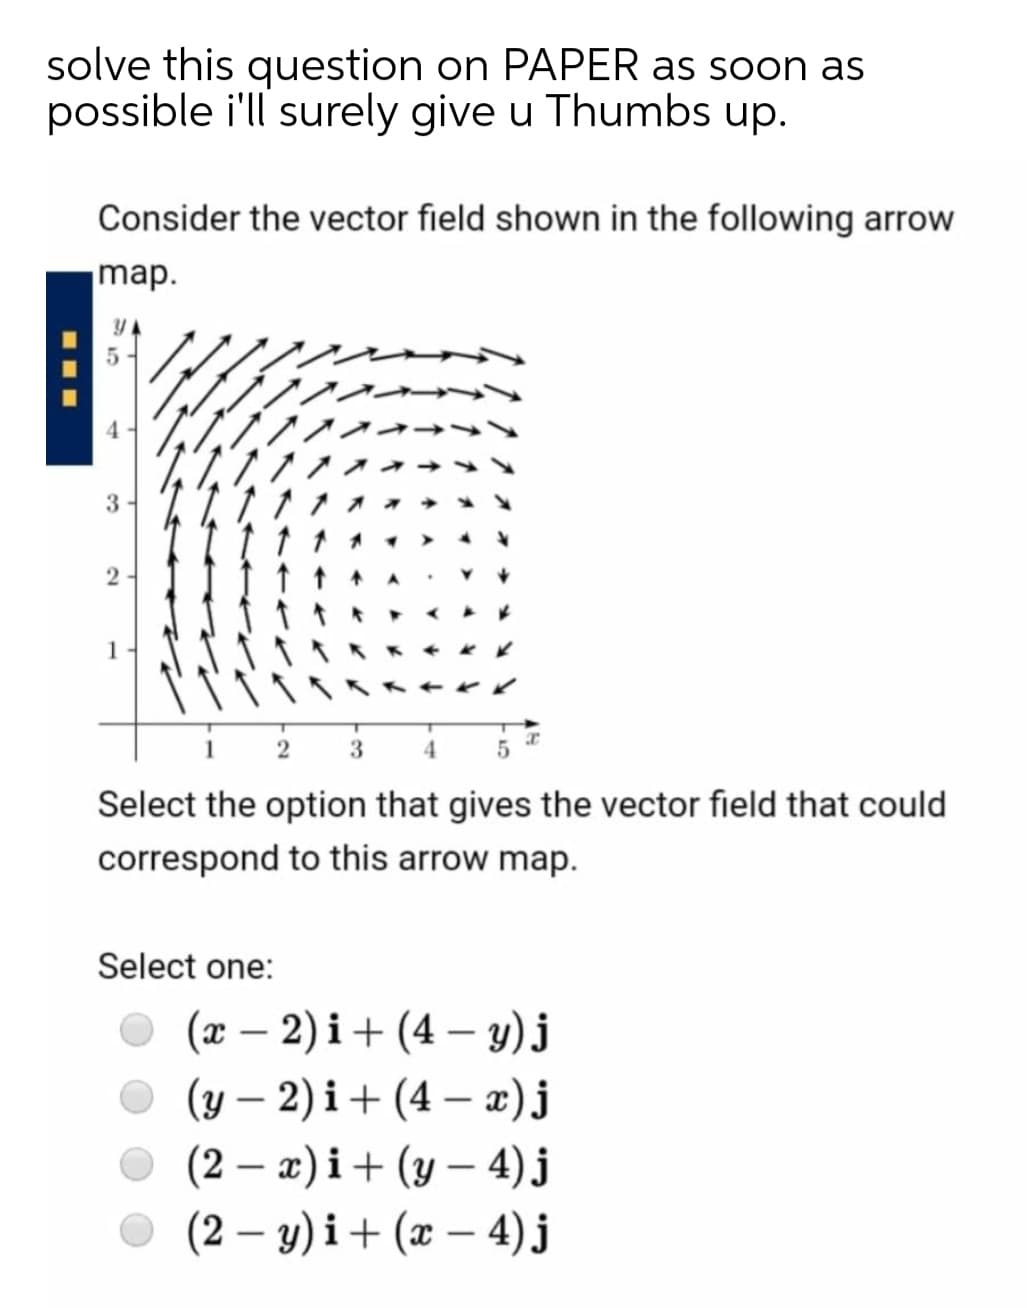 solve this question on PAPER as soon as
possible i'll surely give u Thumbs up.
Consider the vector field shown in the following arrow
map.
5
3
2
3.
Select the option that gives the vector field that could
correspond to this arrow map.
Select one:
O (x – 2) i+ (4 –- y) j
(y – 2) i+ (4 – x)j
O (2 – æ) i+ (y – 4)j
O (2 – y) i+ (x – 4) j
-
